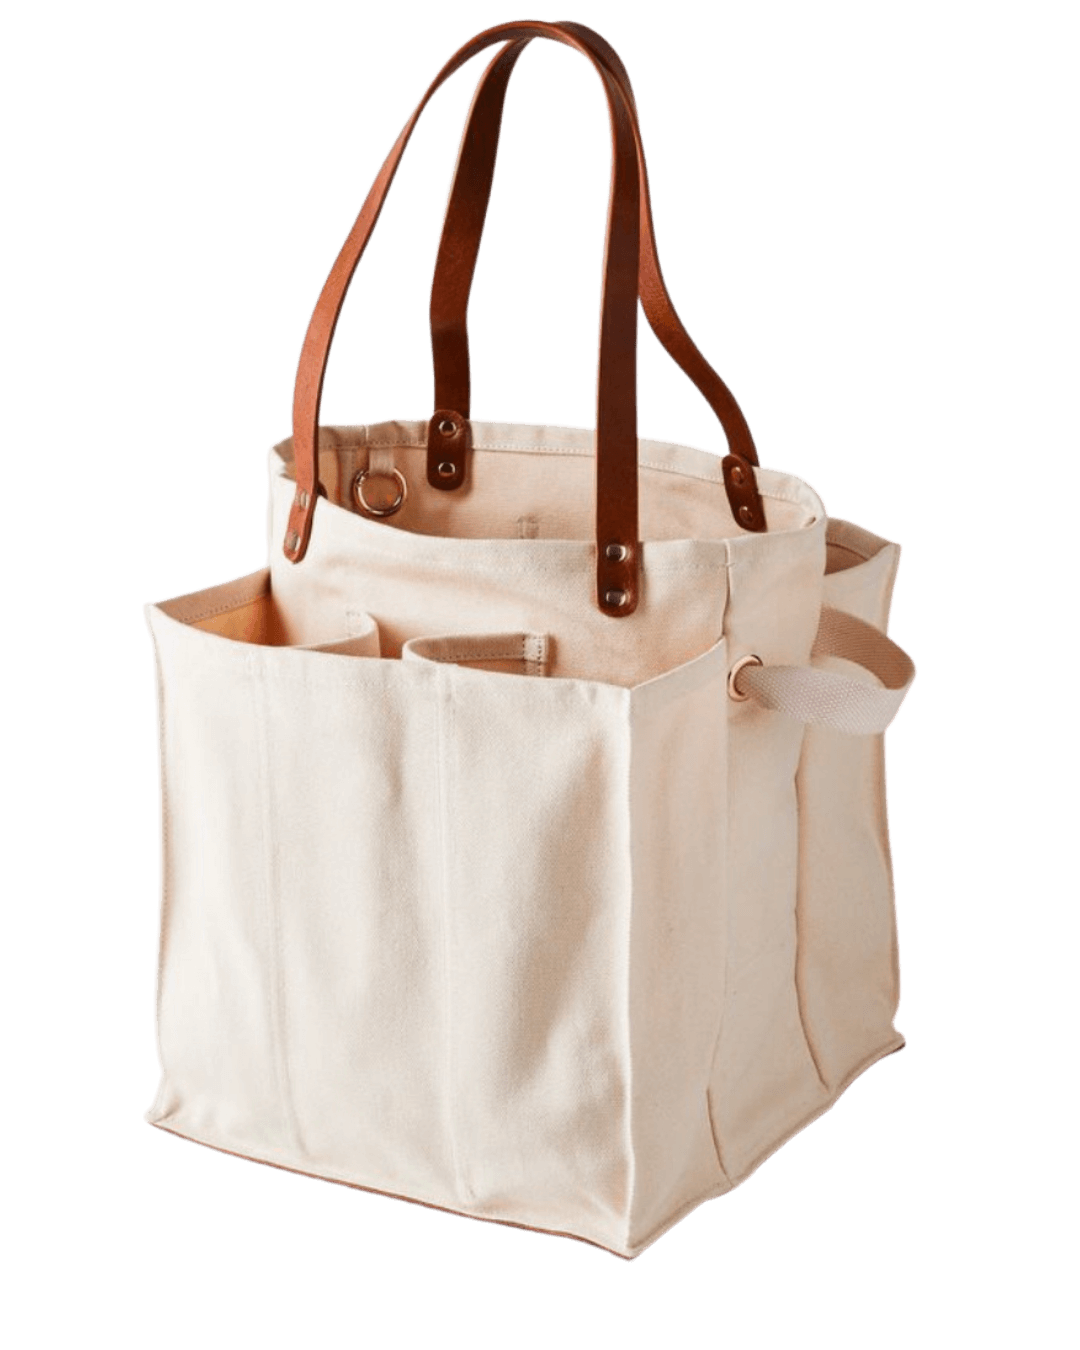 Buy Fabric Market Bags Online in Canada from Wild Bluebell